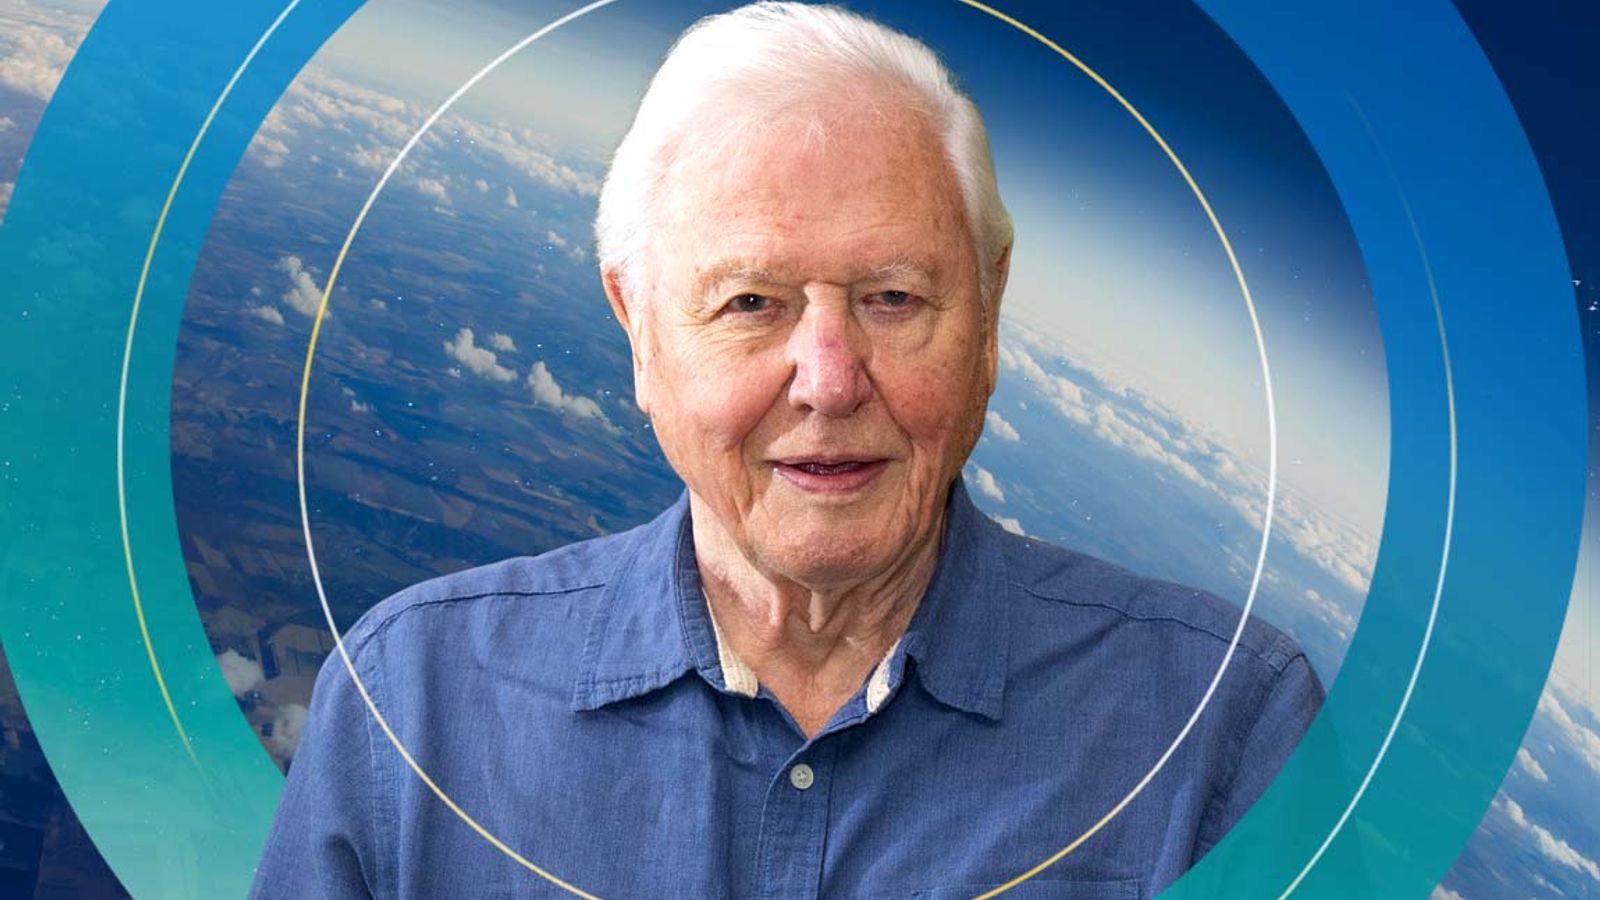 Sir David Attenborough named 'Champion of the Earth' by UN | Climate News |  Sky News